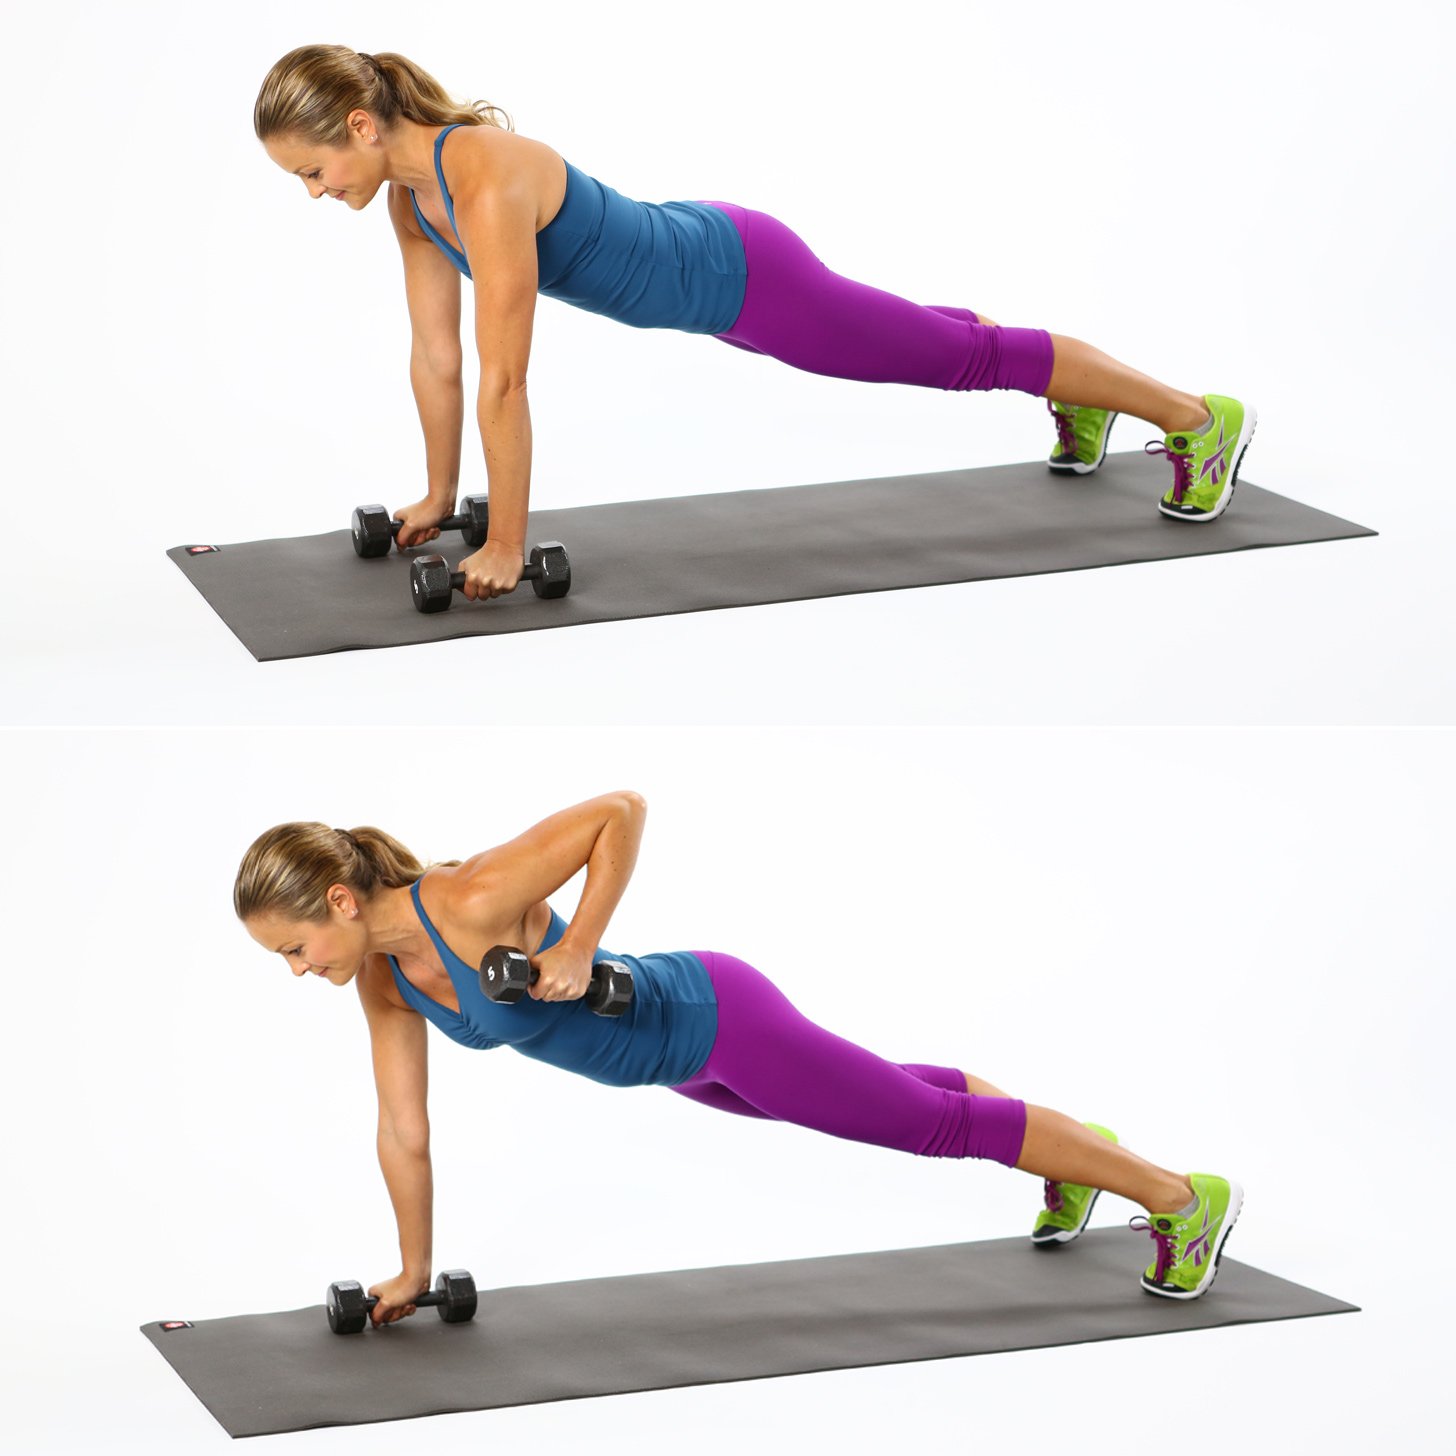 How to Do Plank With Row | Back Exercise | POPSUGAR Fitness